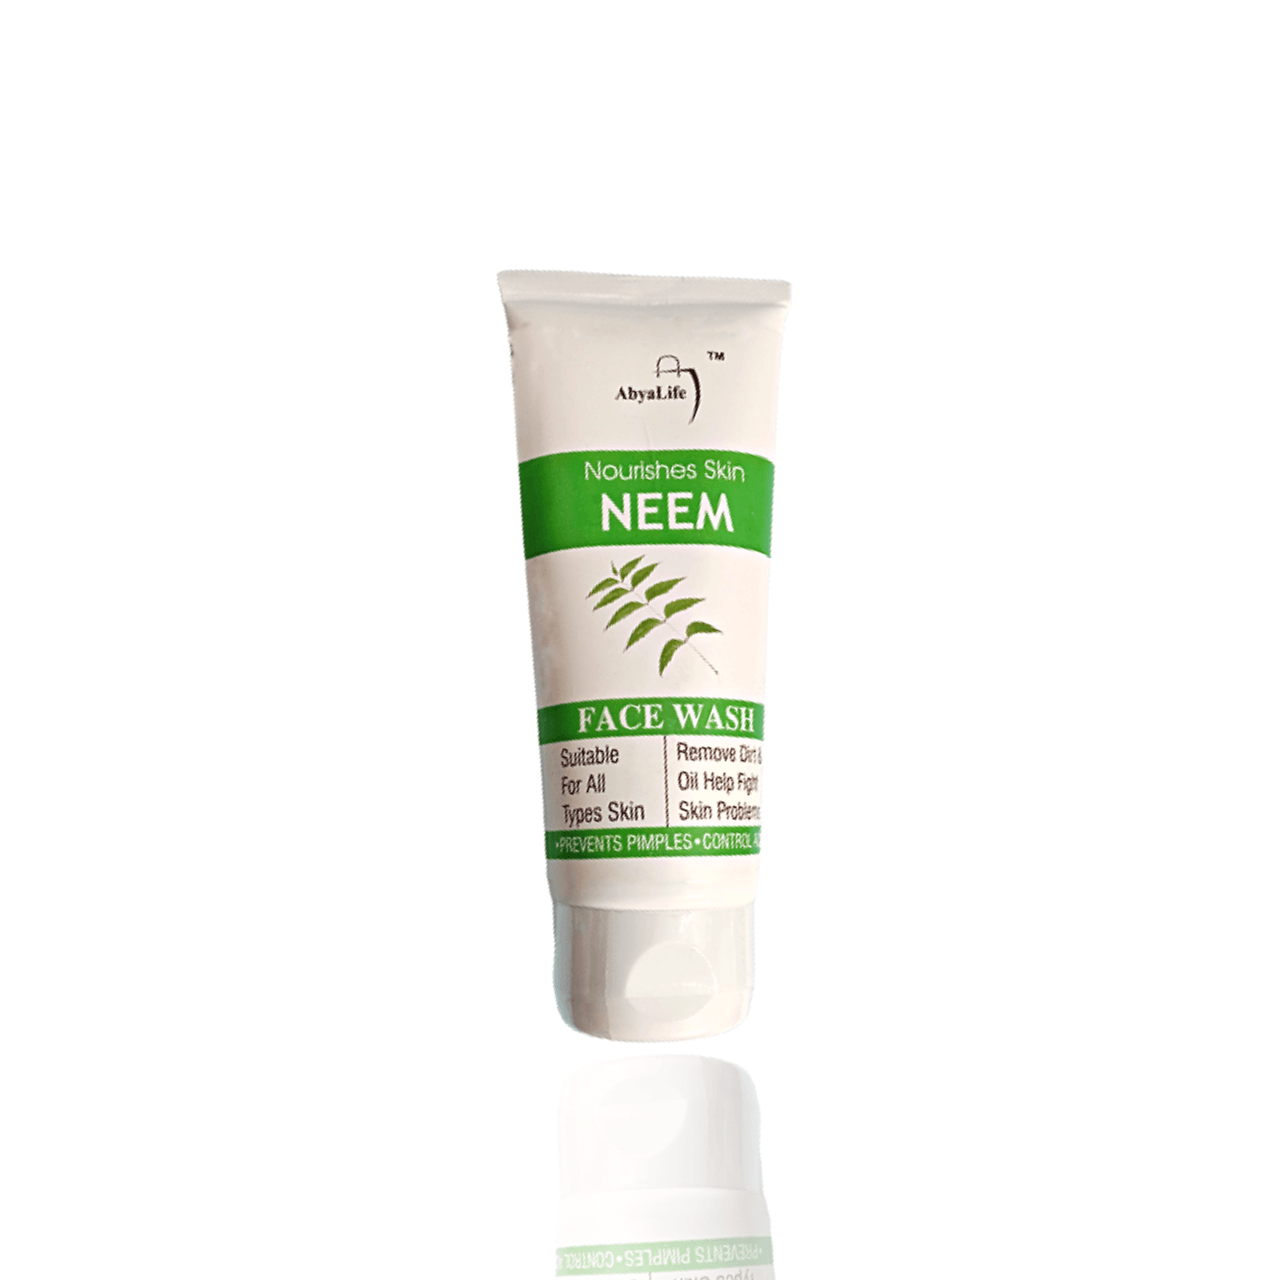 Forget harsh chemicals, embrace Ayurveda's wisdom! ✨ AbyaLife Neem Face Wash (100ml) is your key to clear, glowing Indian skin. This gentle cleanser packed with neem's antibacterial magic purifies deeply, nourishes your skin with natural goodness, and reveals a healthy, luminous complexion. Discover the secret to timeless Indian beauty with every wash! #ayurvedaskincare #abyalife #indianglow